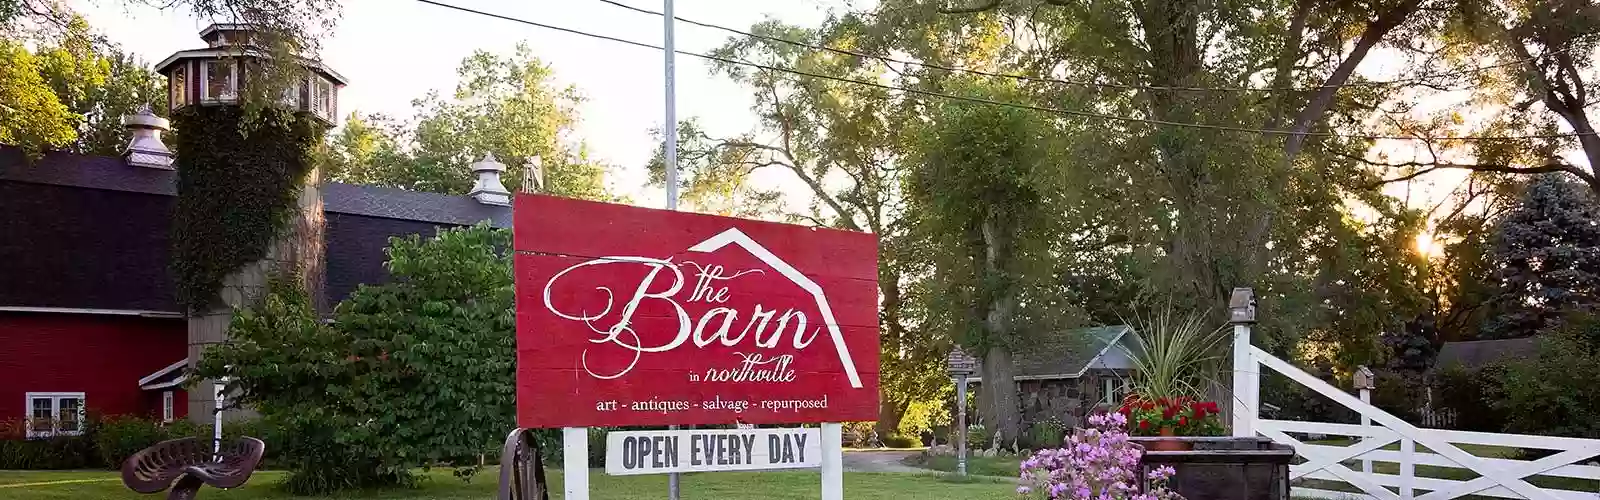 The Barn in Northville